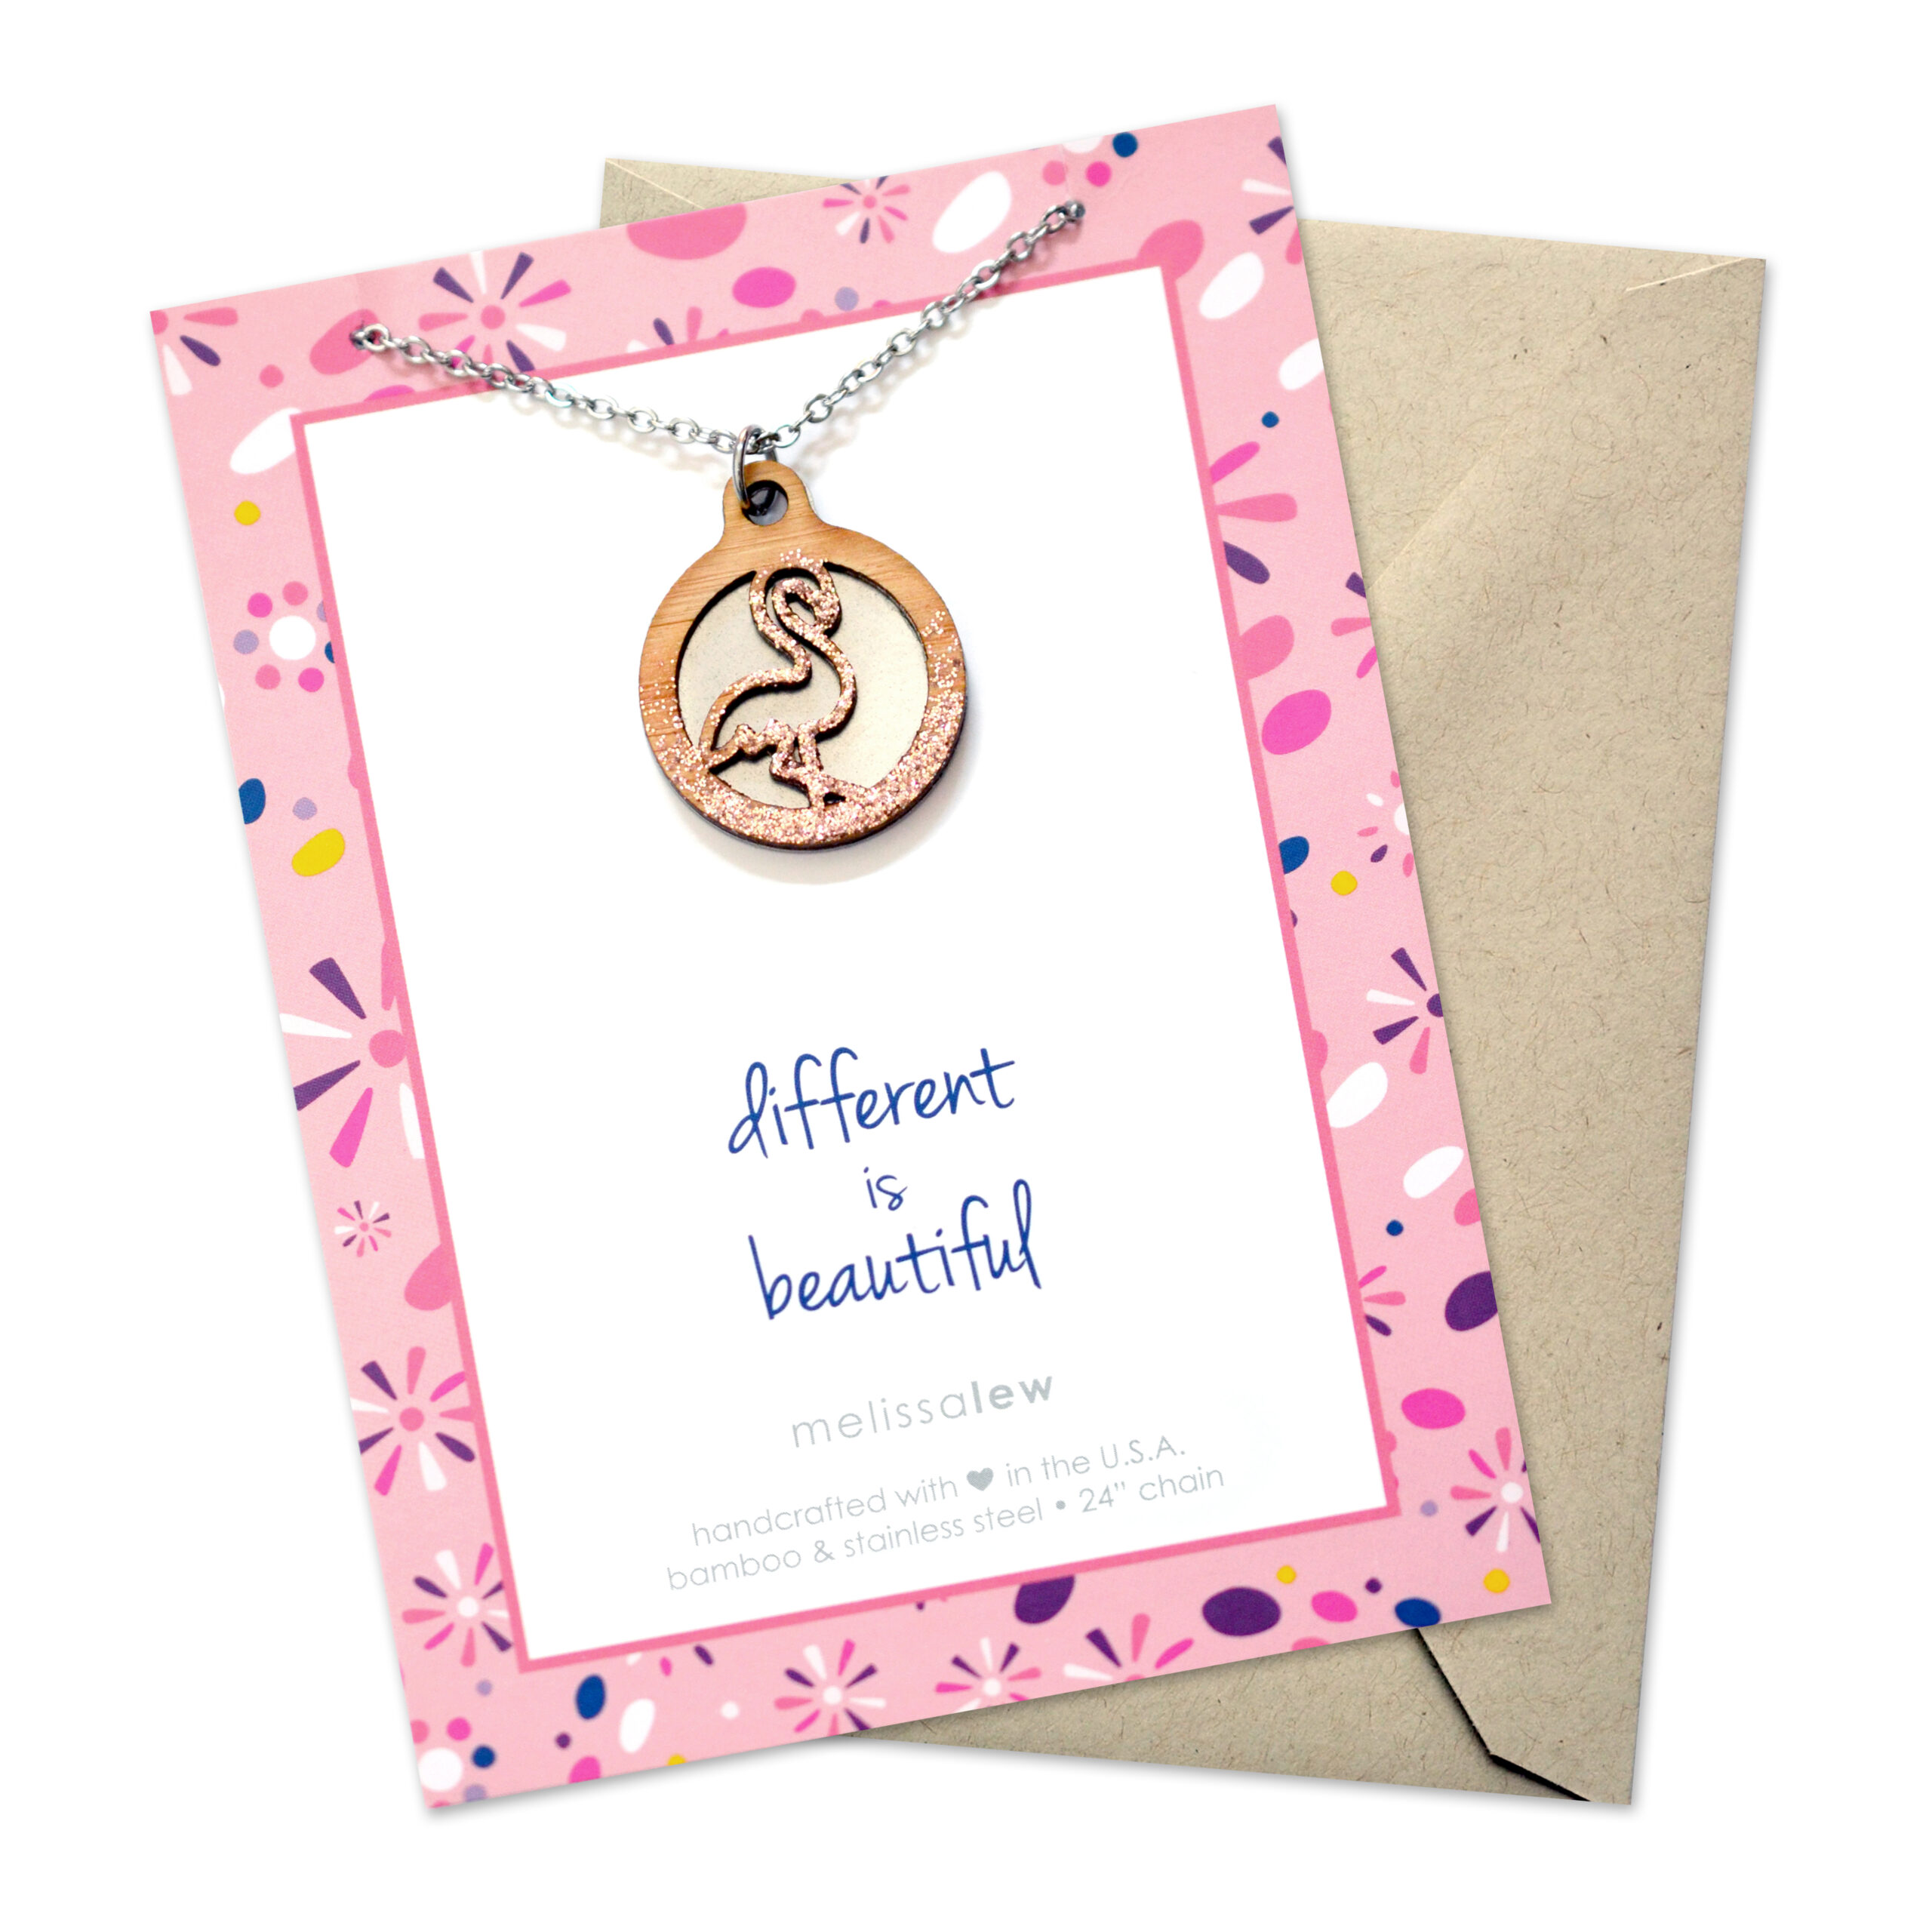 Rose gold glitter flamingo necklace made from bamboo and stainless steel